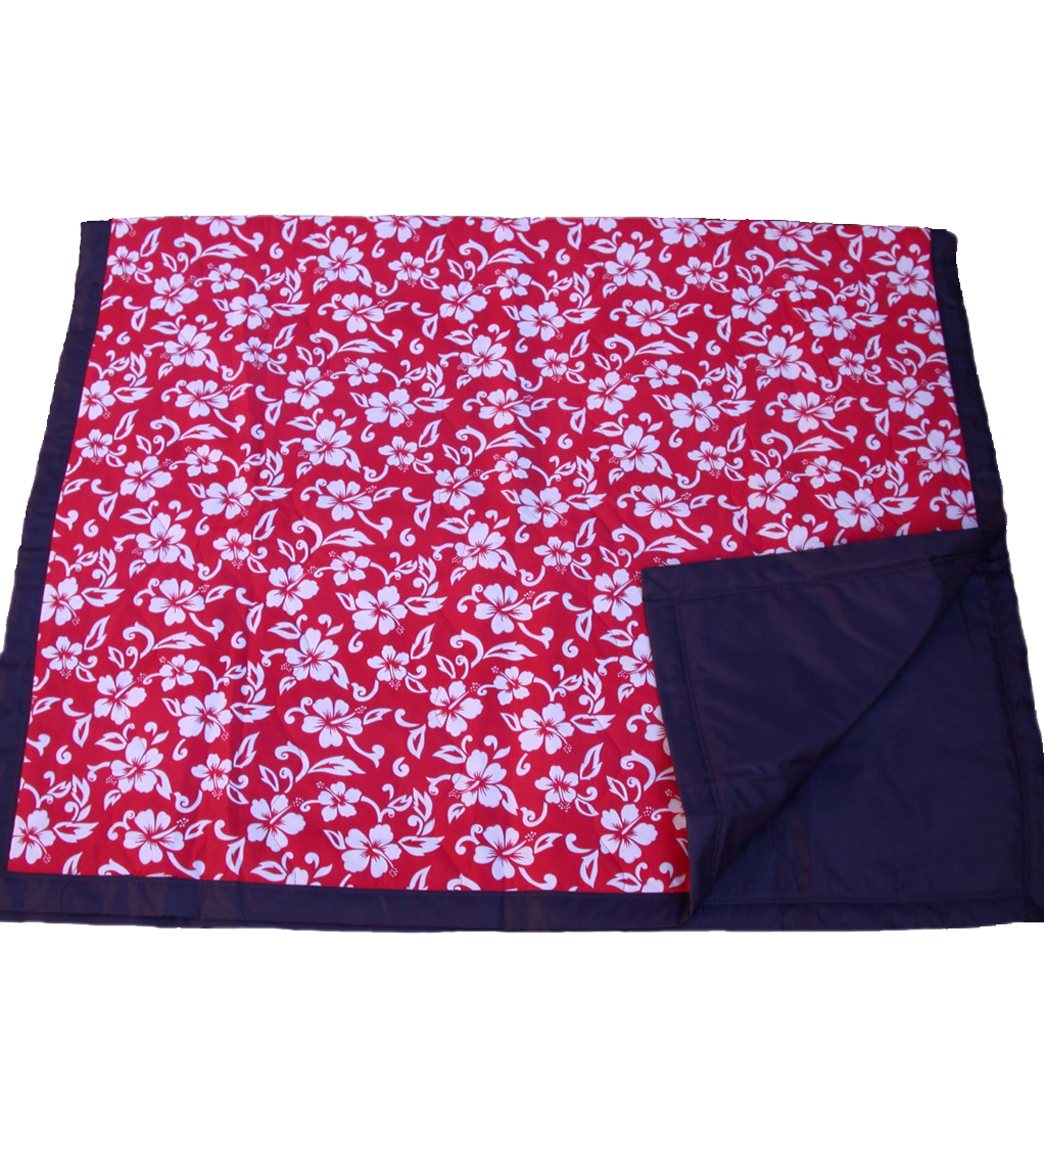 Tuffo Red Hawaii Beach Blanket at SwimOutlet.com